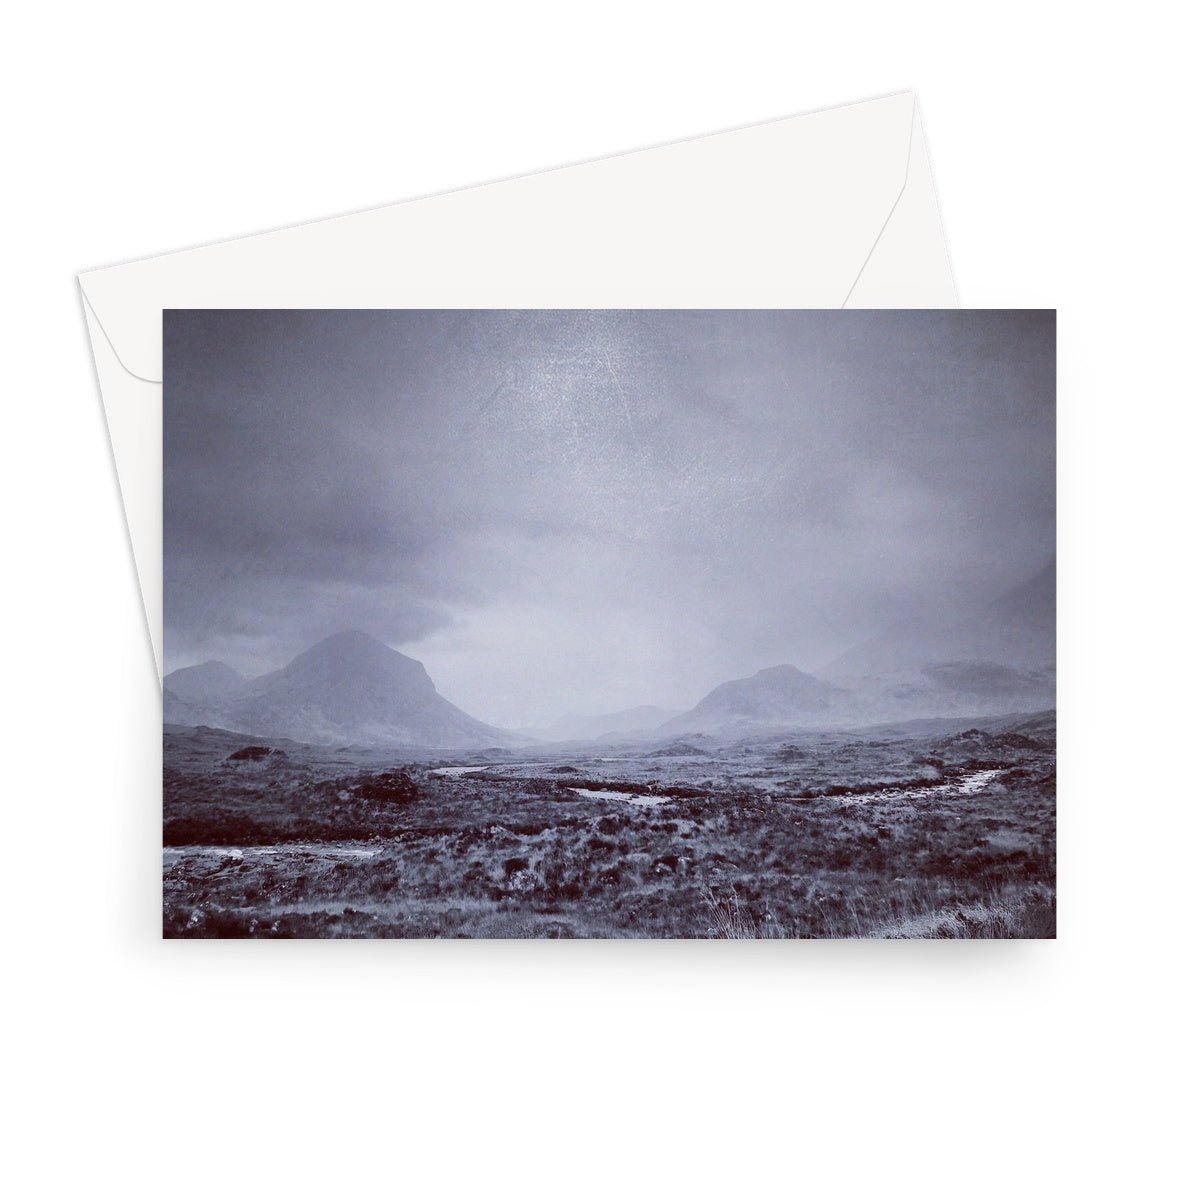 The Brooding Cuillin Skye Art Gifts Greeting Card-Greetings Cards-Skye Art Gallery-7"x5"-1 Card-Paintings, Prints, Homeware, Art Gifts From Scotland By Scottish Artist Kevin Hunter